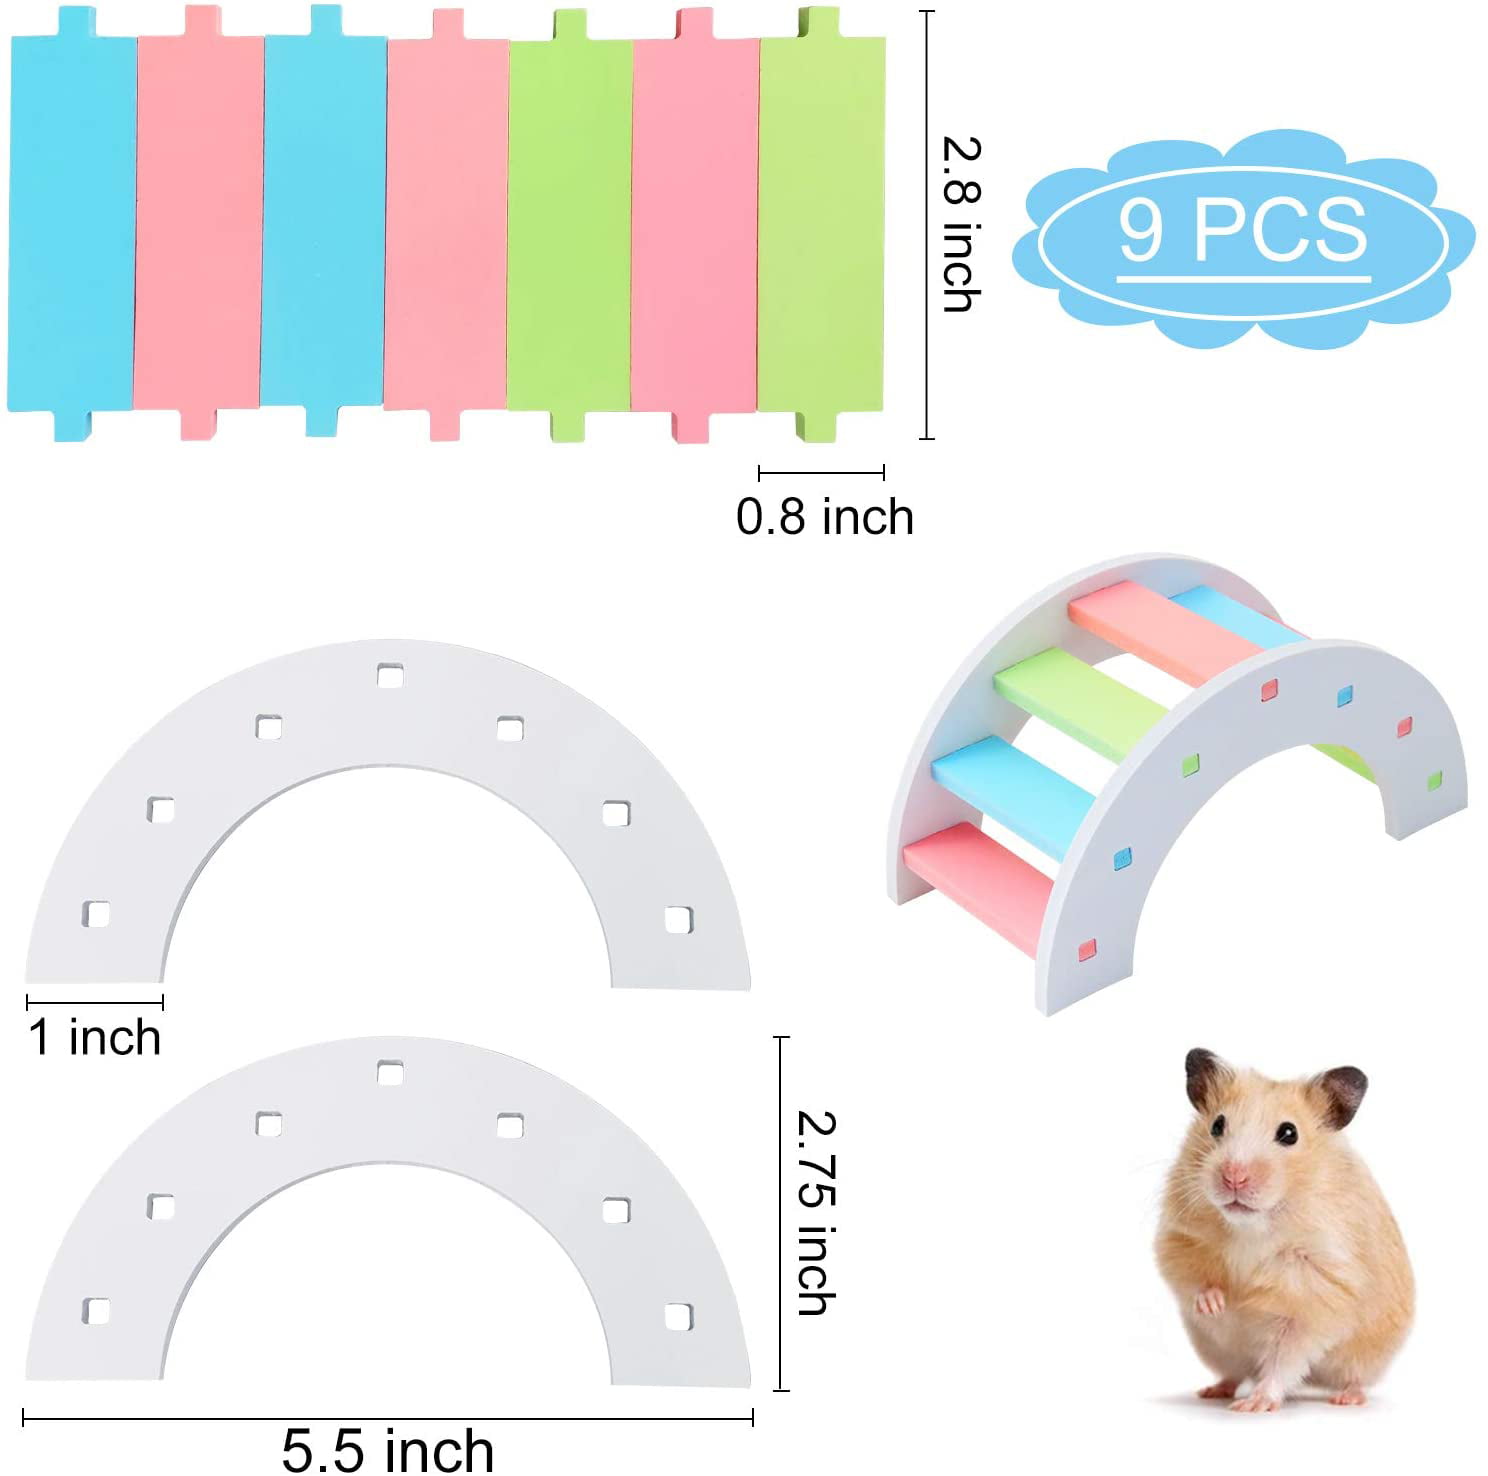 Boredom Breaker Small Animal Activity Toy DIY Hamster Cage Accessories Hamster Climb and Play Toy Multicolor Rainbow Bridge & Seesaw & Swing WishLotus Colorful Hamster Toys 3 Pack 